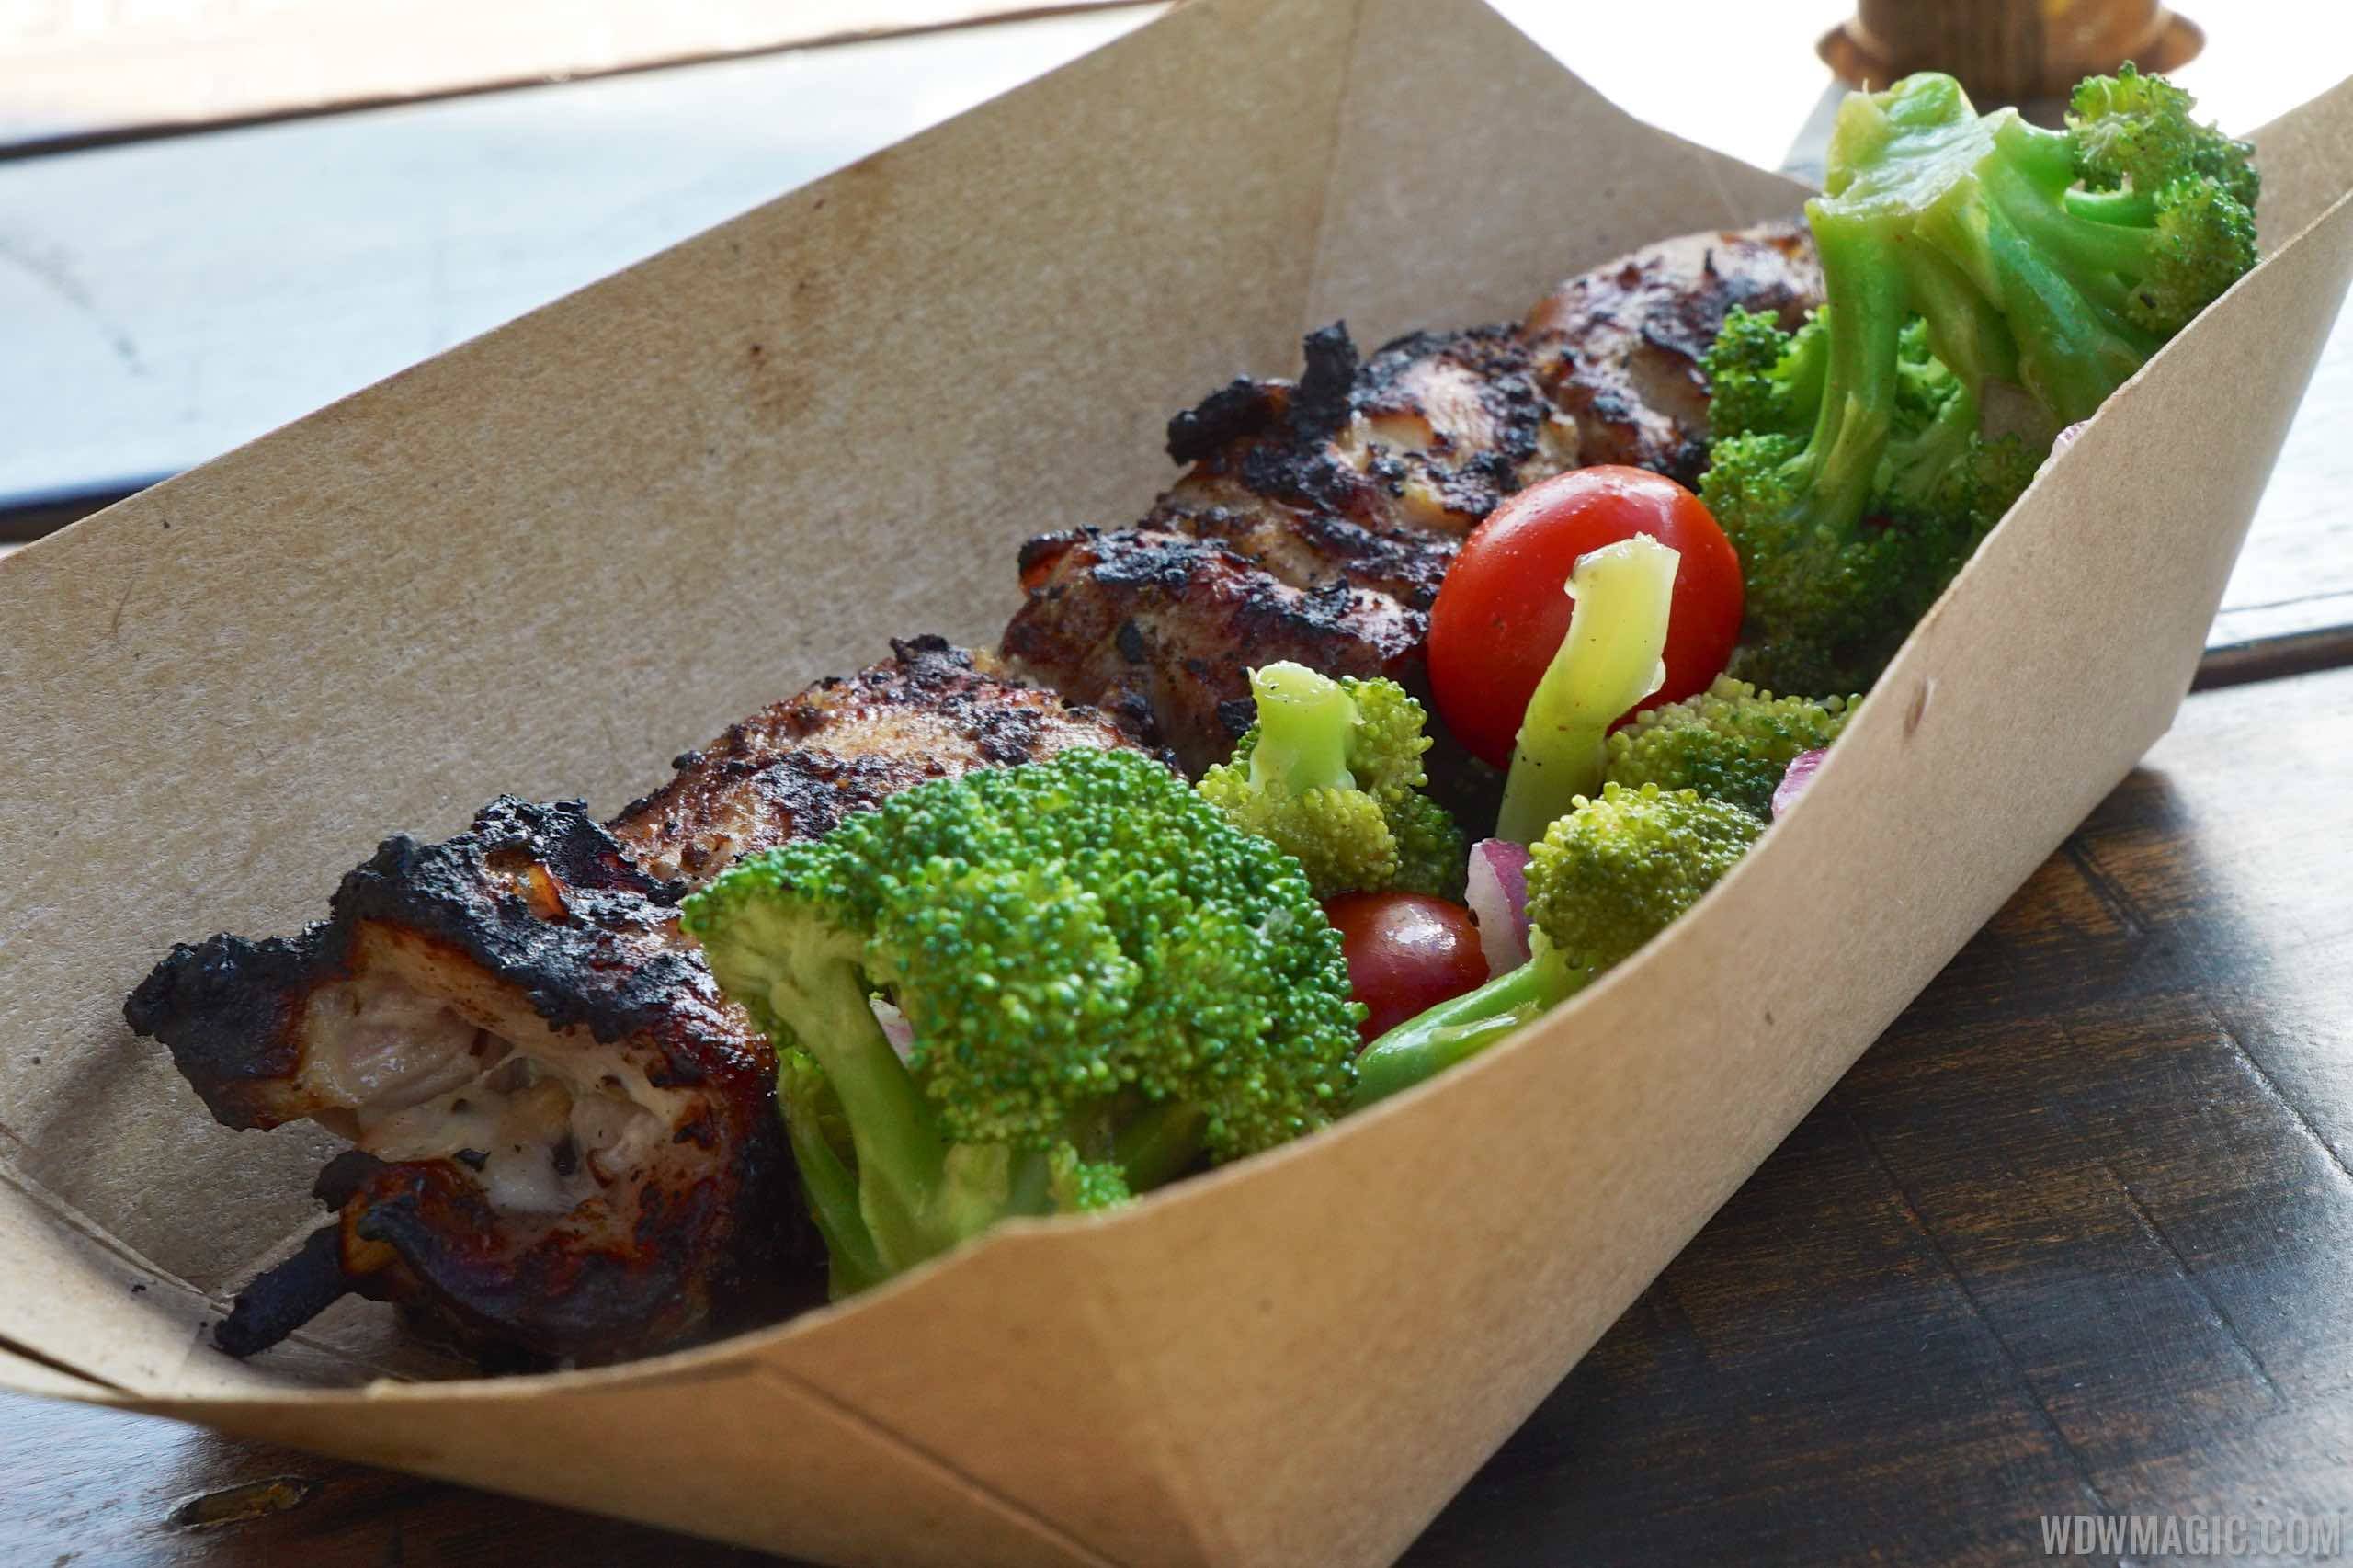 Harambe Market Food - Chicken Skewer with broccoli and tomato salad $8.99